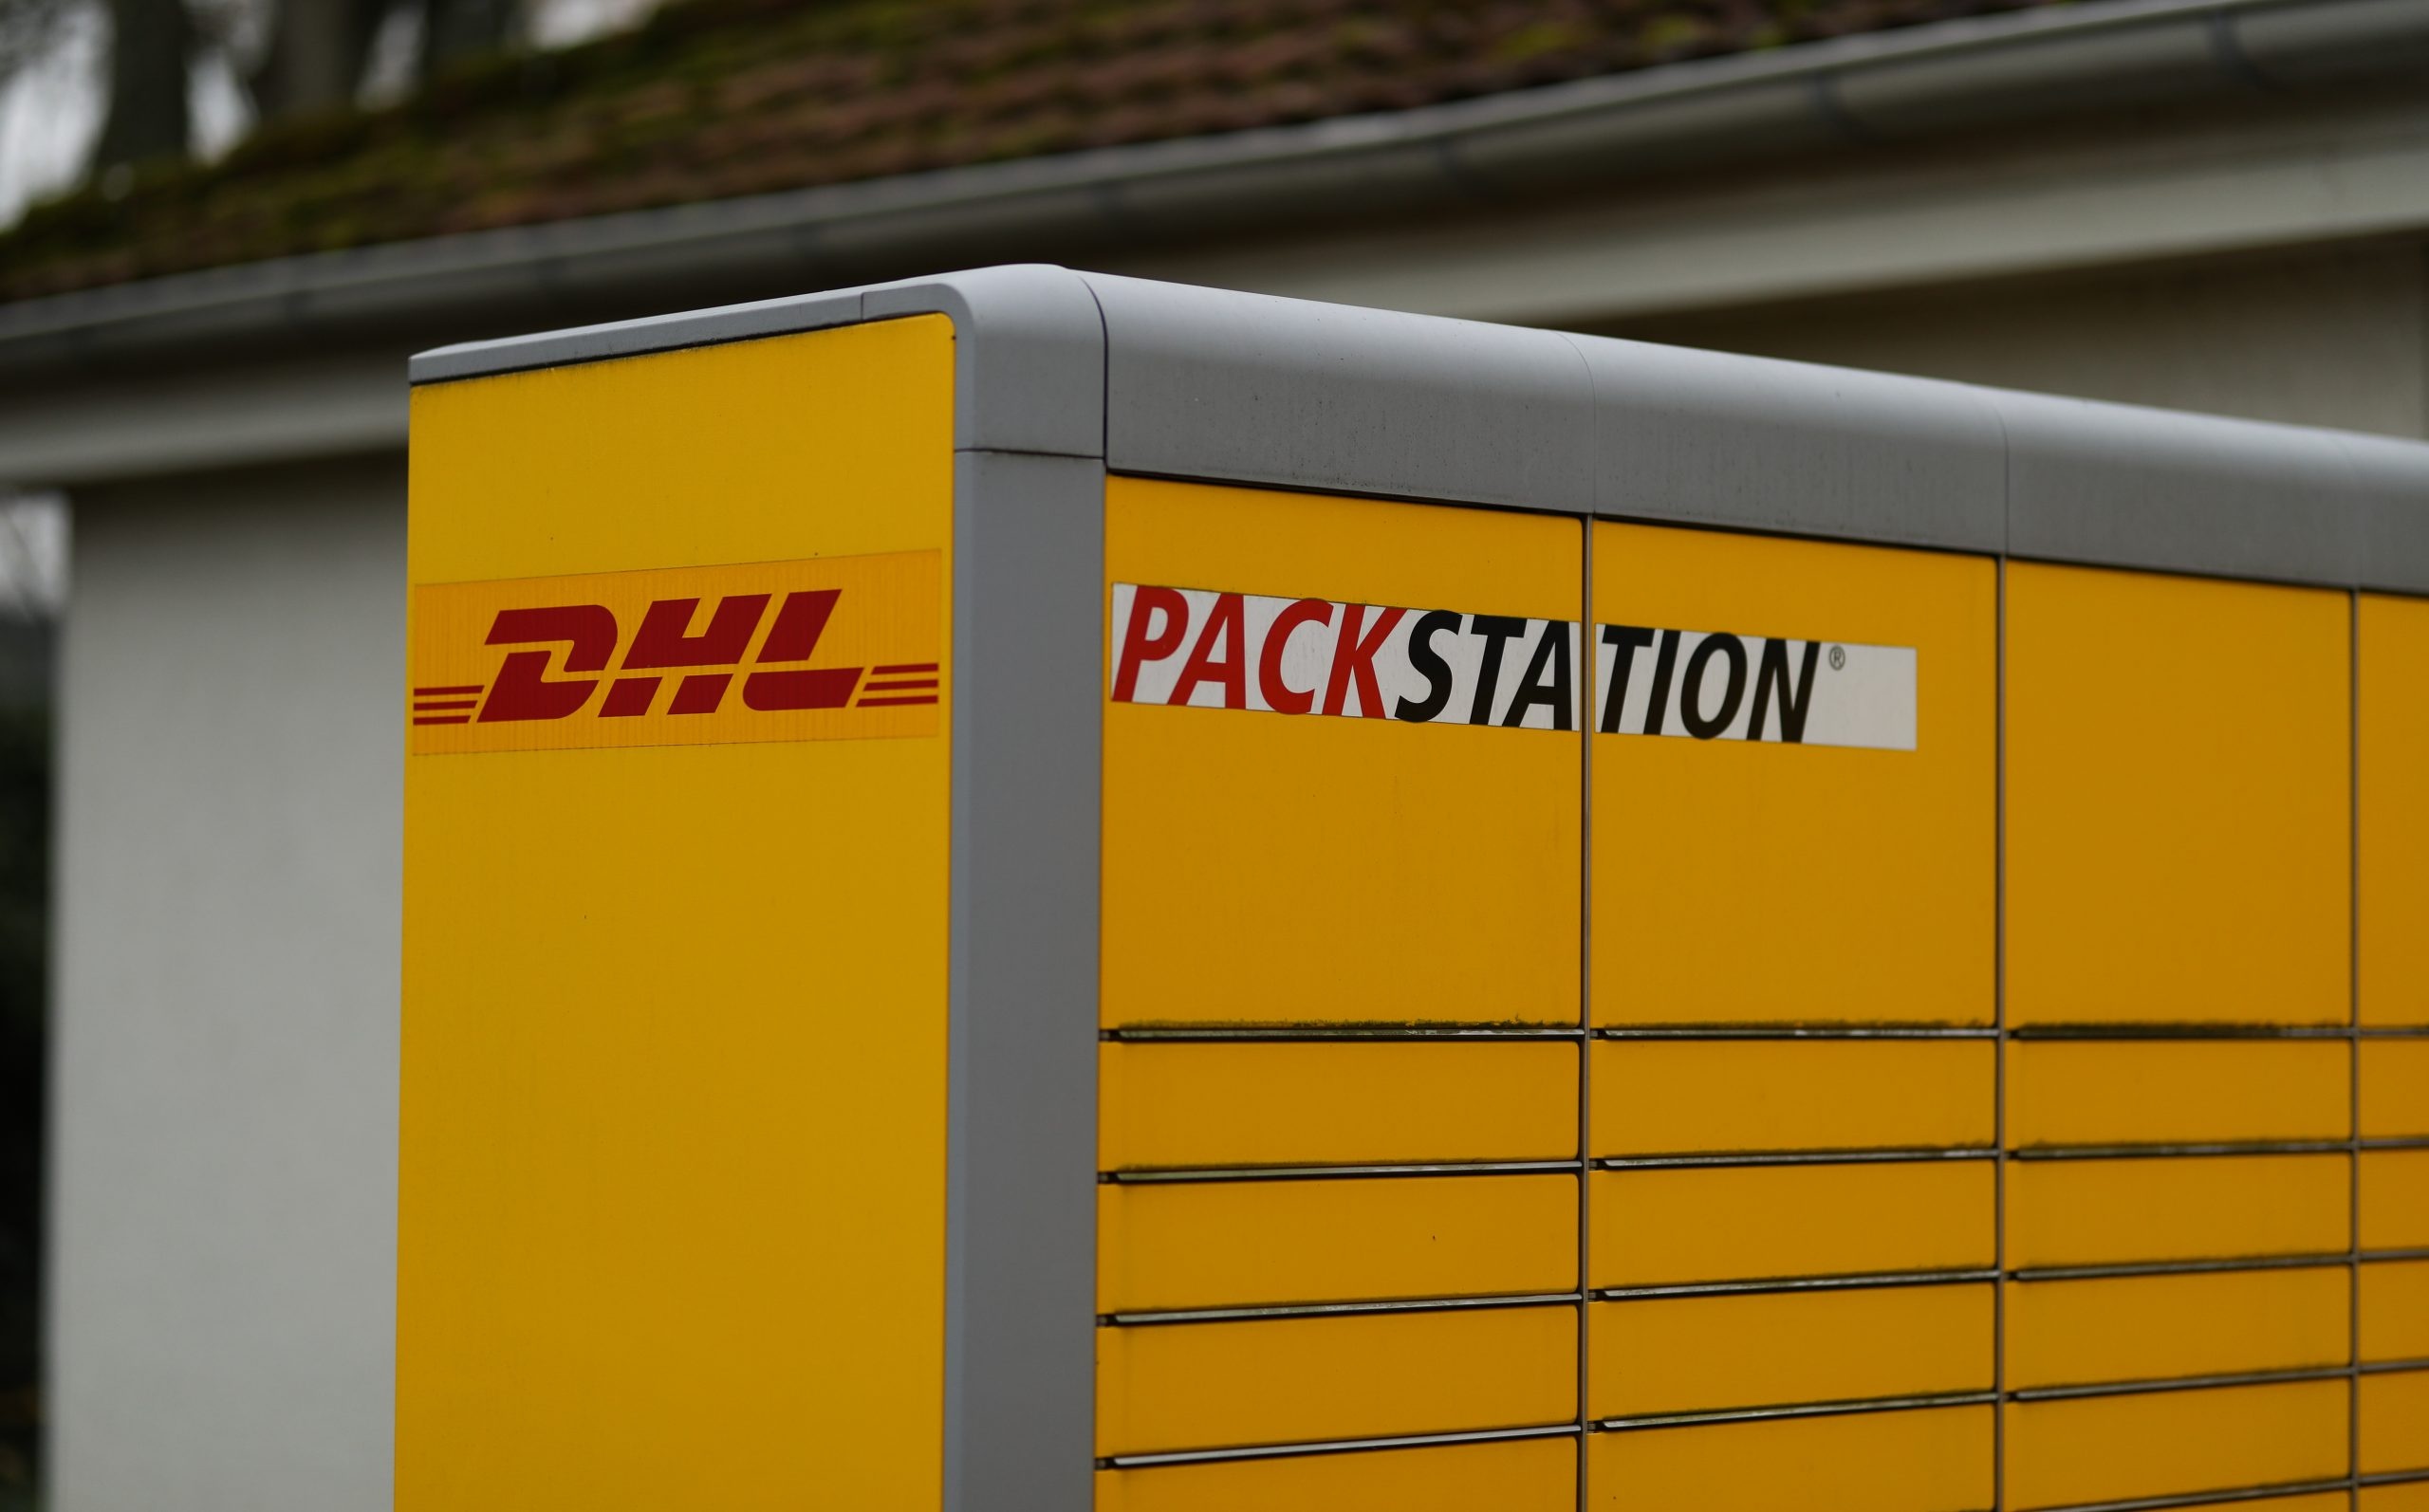 DHL: Packstation, A service of parcel lockers run by a business unit of Deutsche Post's Mail division. 2560x1600 HD Wallpaper.